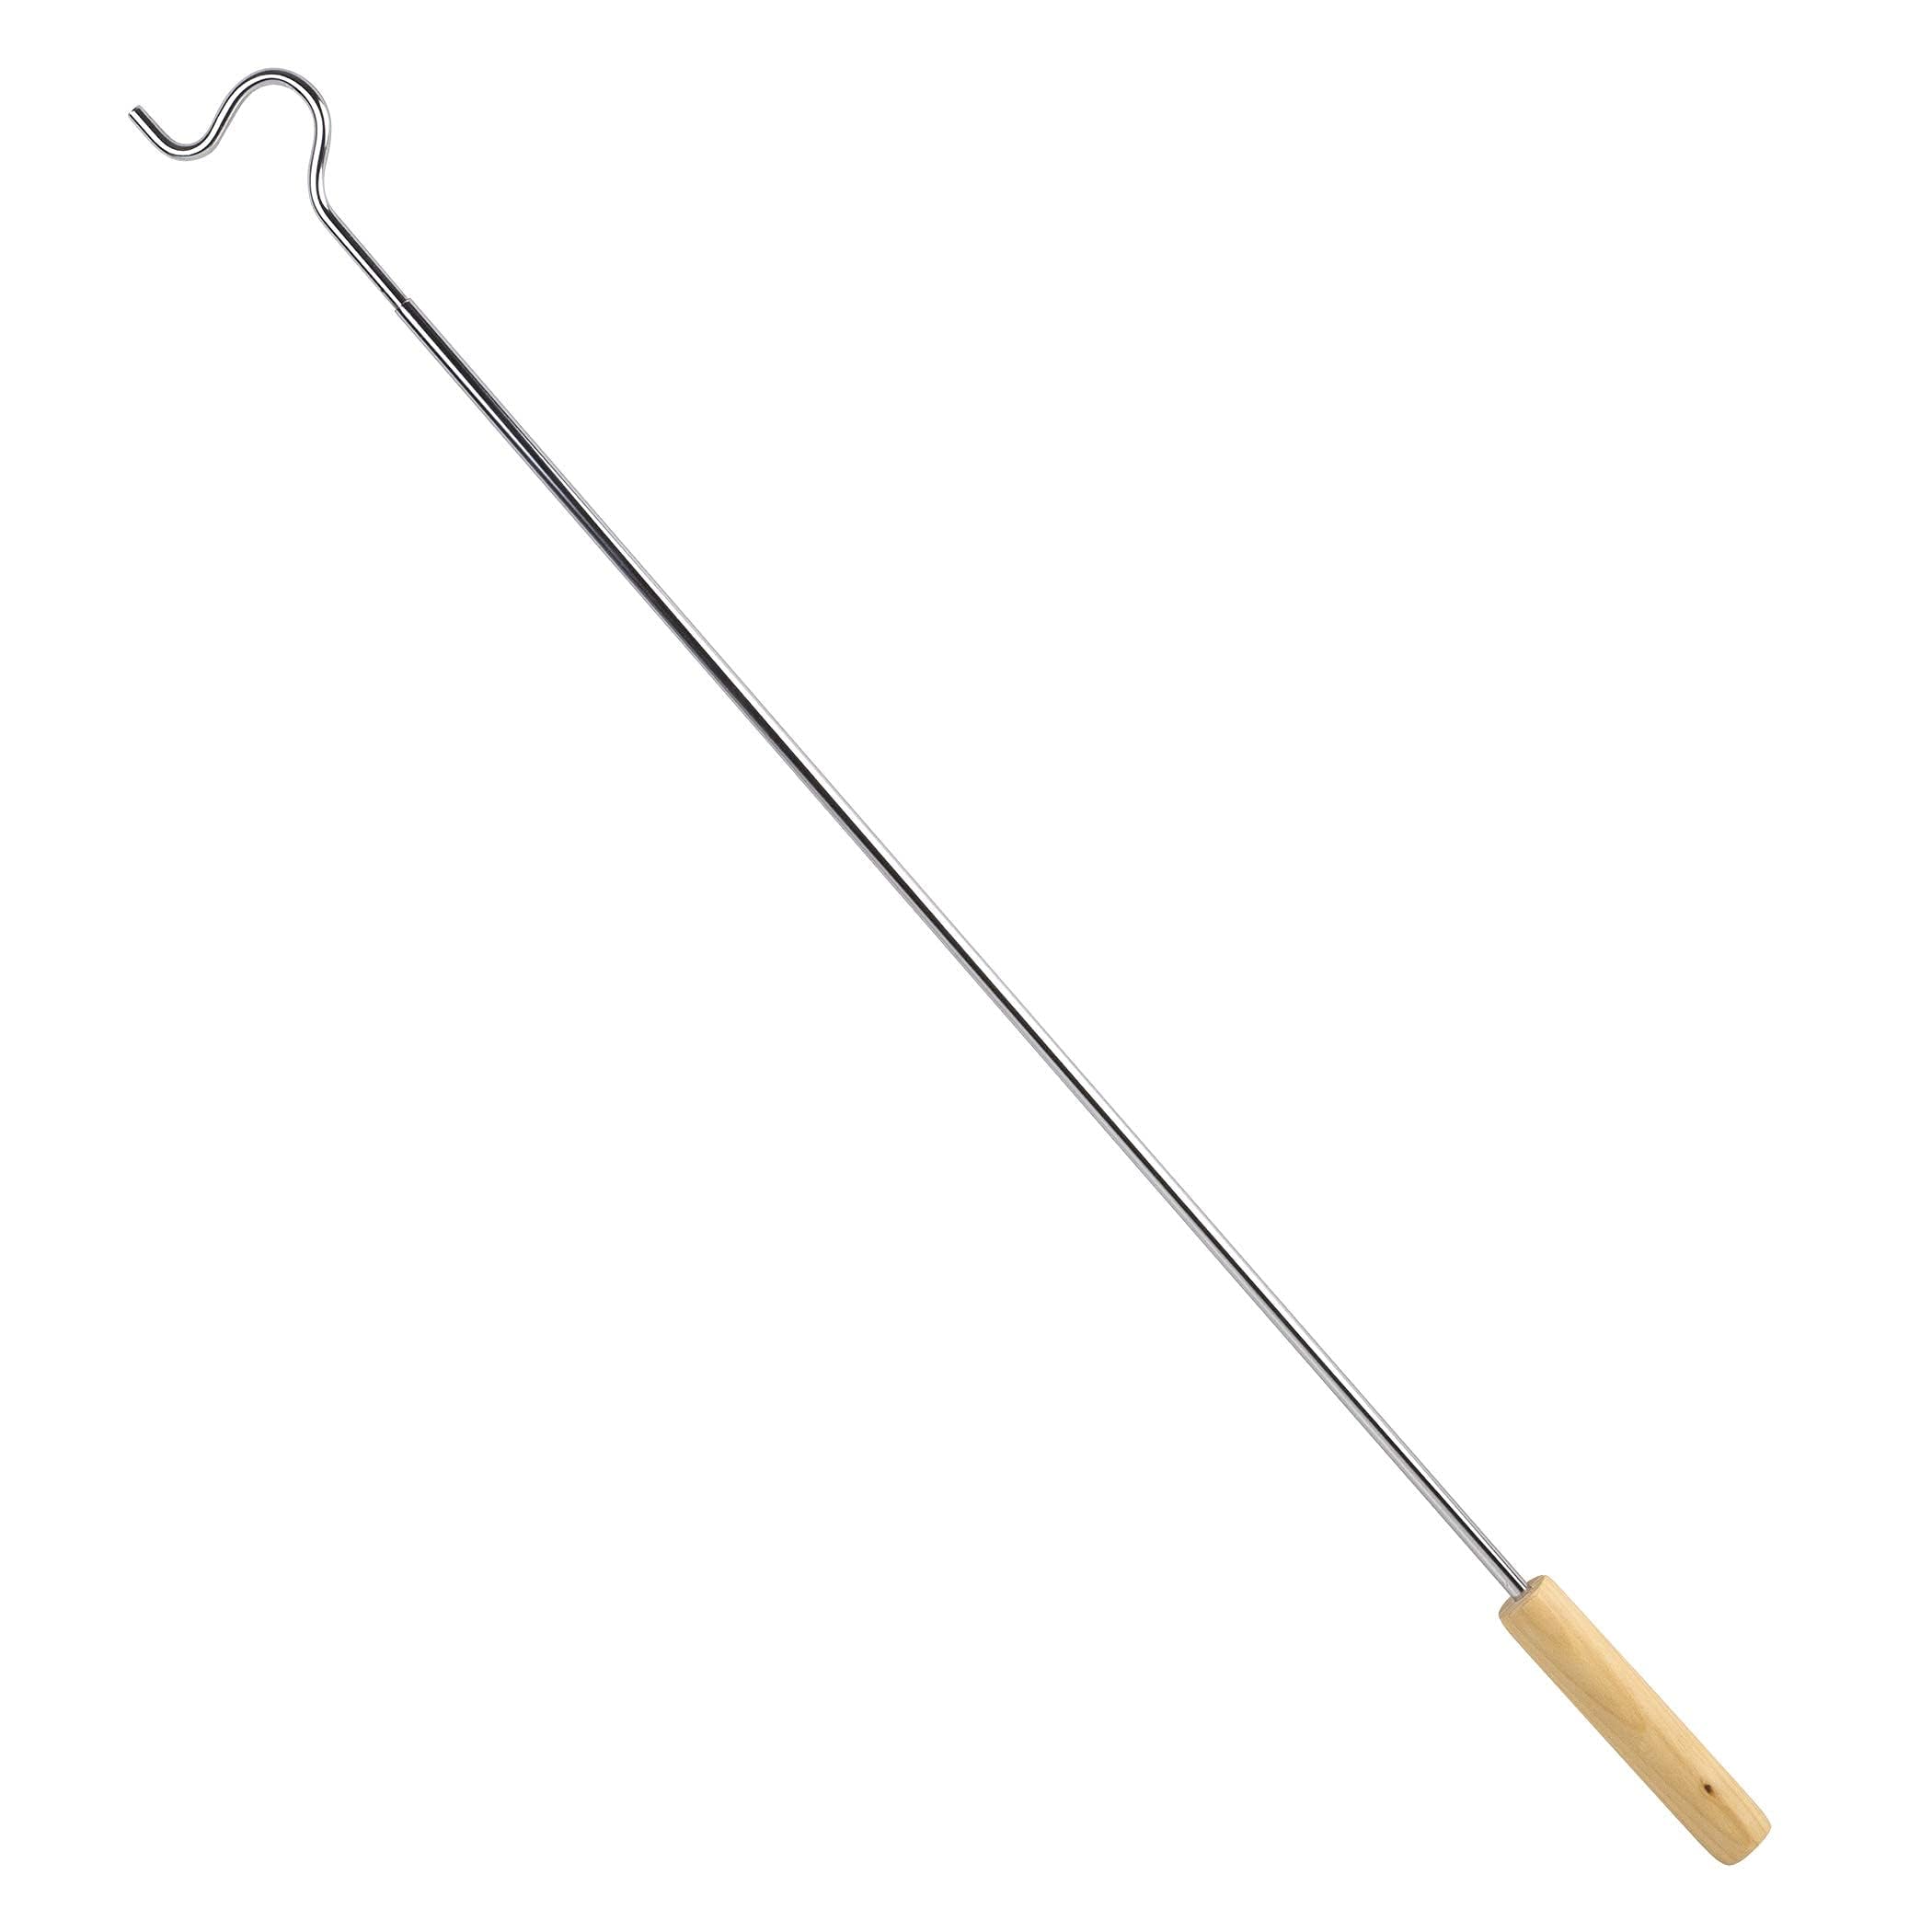 Closet Reacher Pole with Hook and Wooden Handle, Heavy Duty - Adjustable 2.75-5 Feet, Chrome Plated Steel Clothing Hanger Shepherds Hook to Easily Reach Clothes etc - Perfect for College Dorm  - Very Good